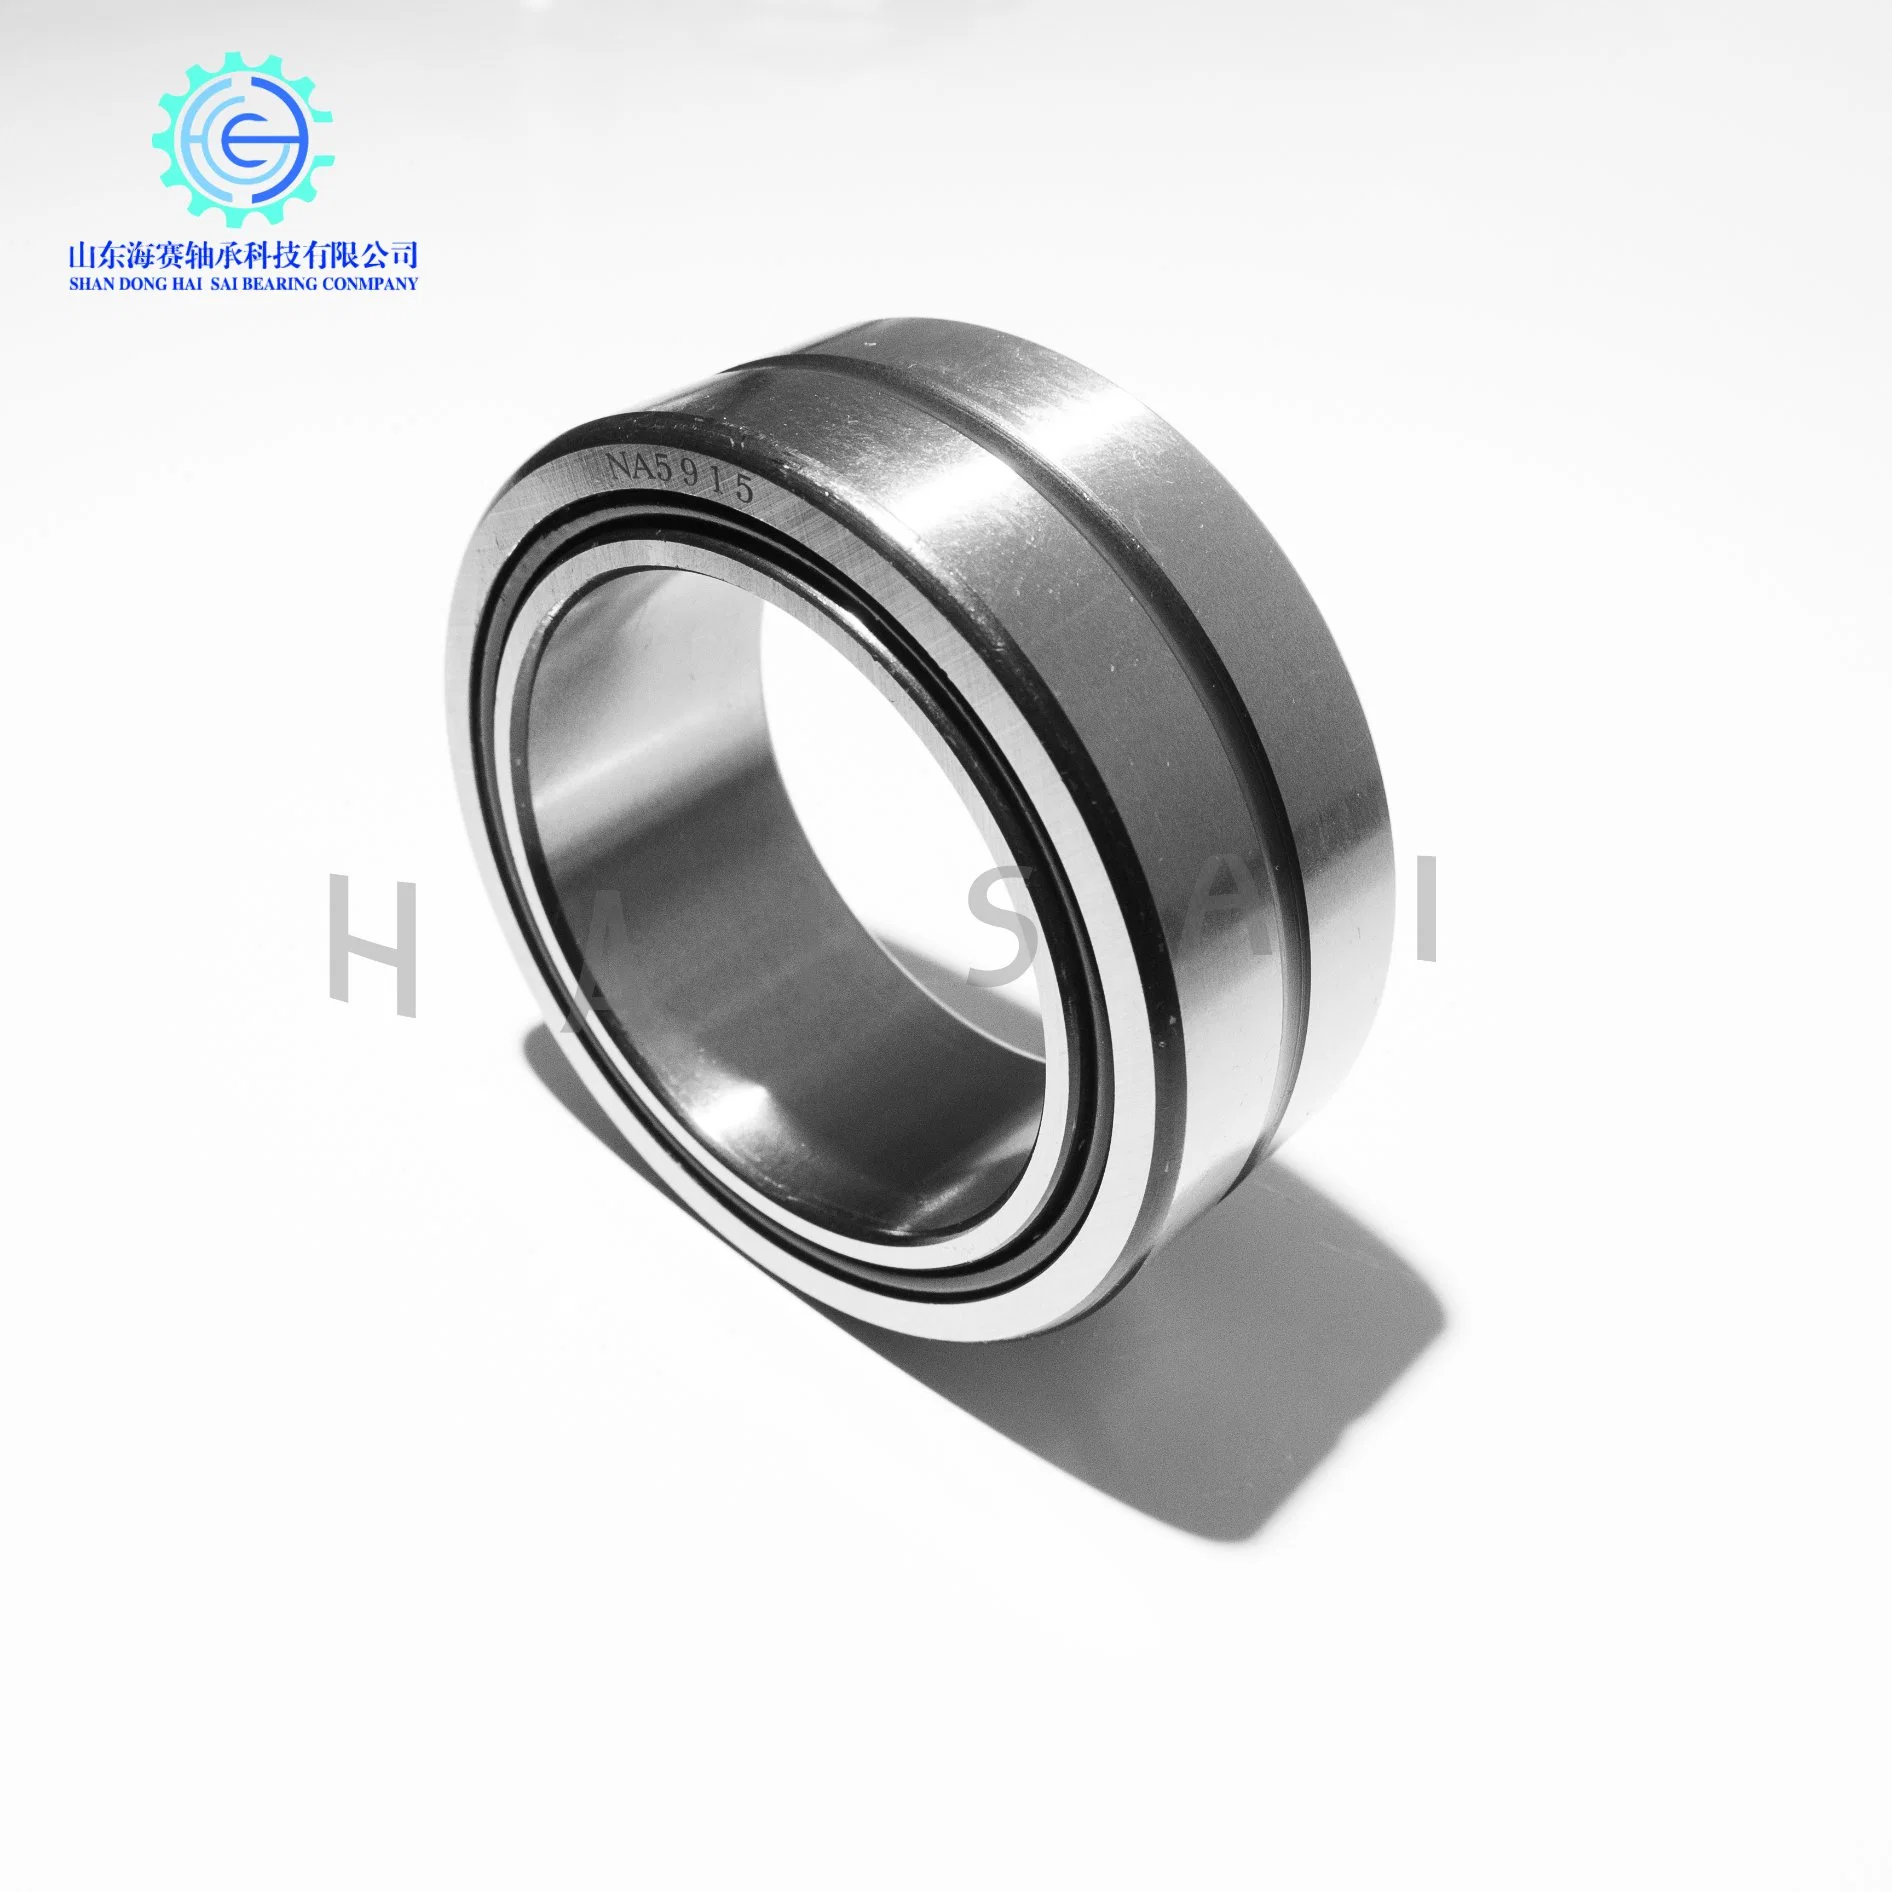 Na5915 Needle Roller Bearings with High Load Carrying Capacity